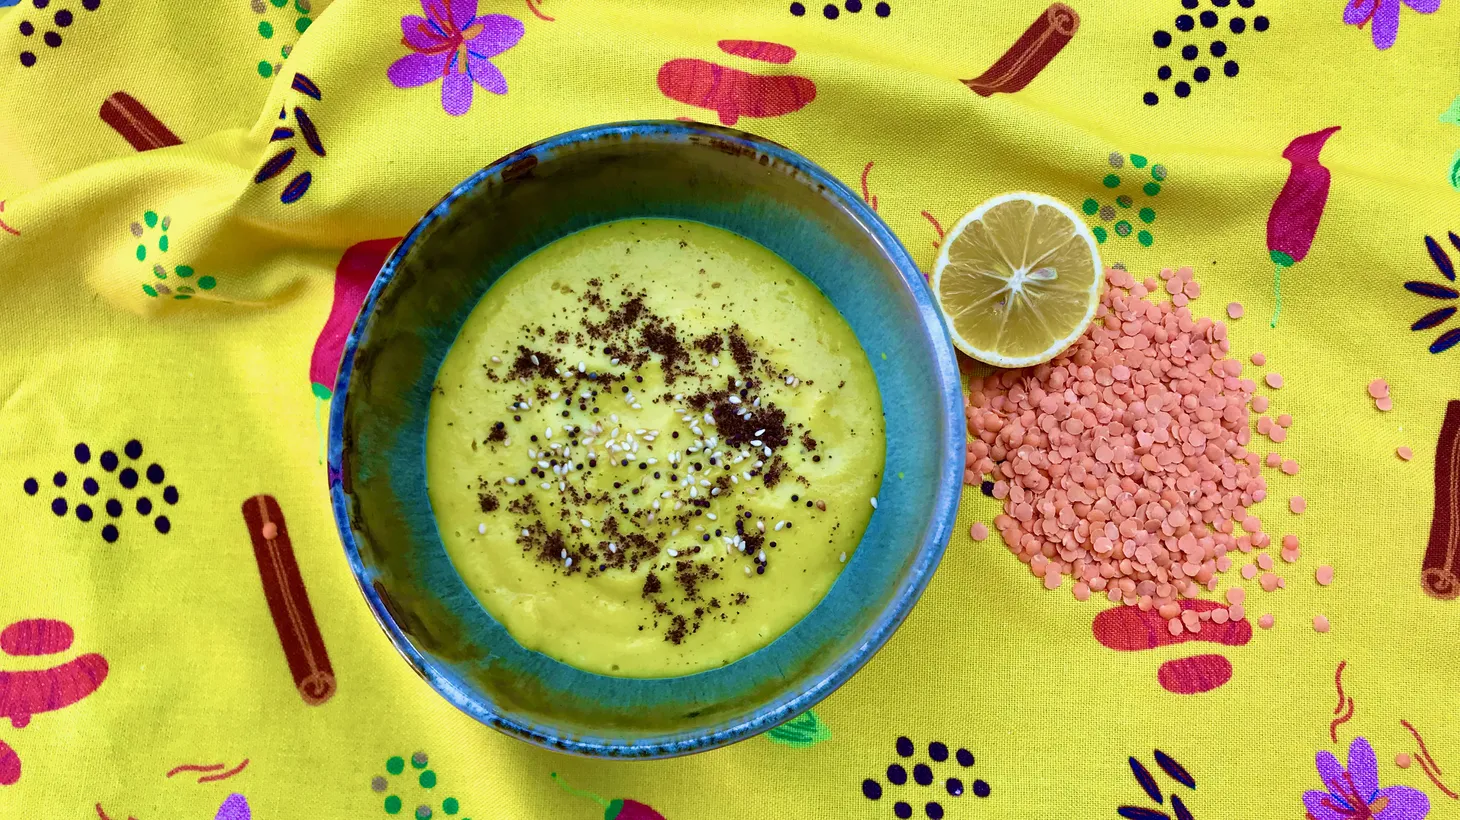 Shorbat Adas is a warming and nutritious Middle Eastern soup of red lentils and spices finished with lemon juice.